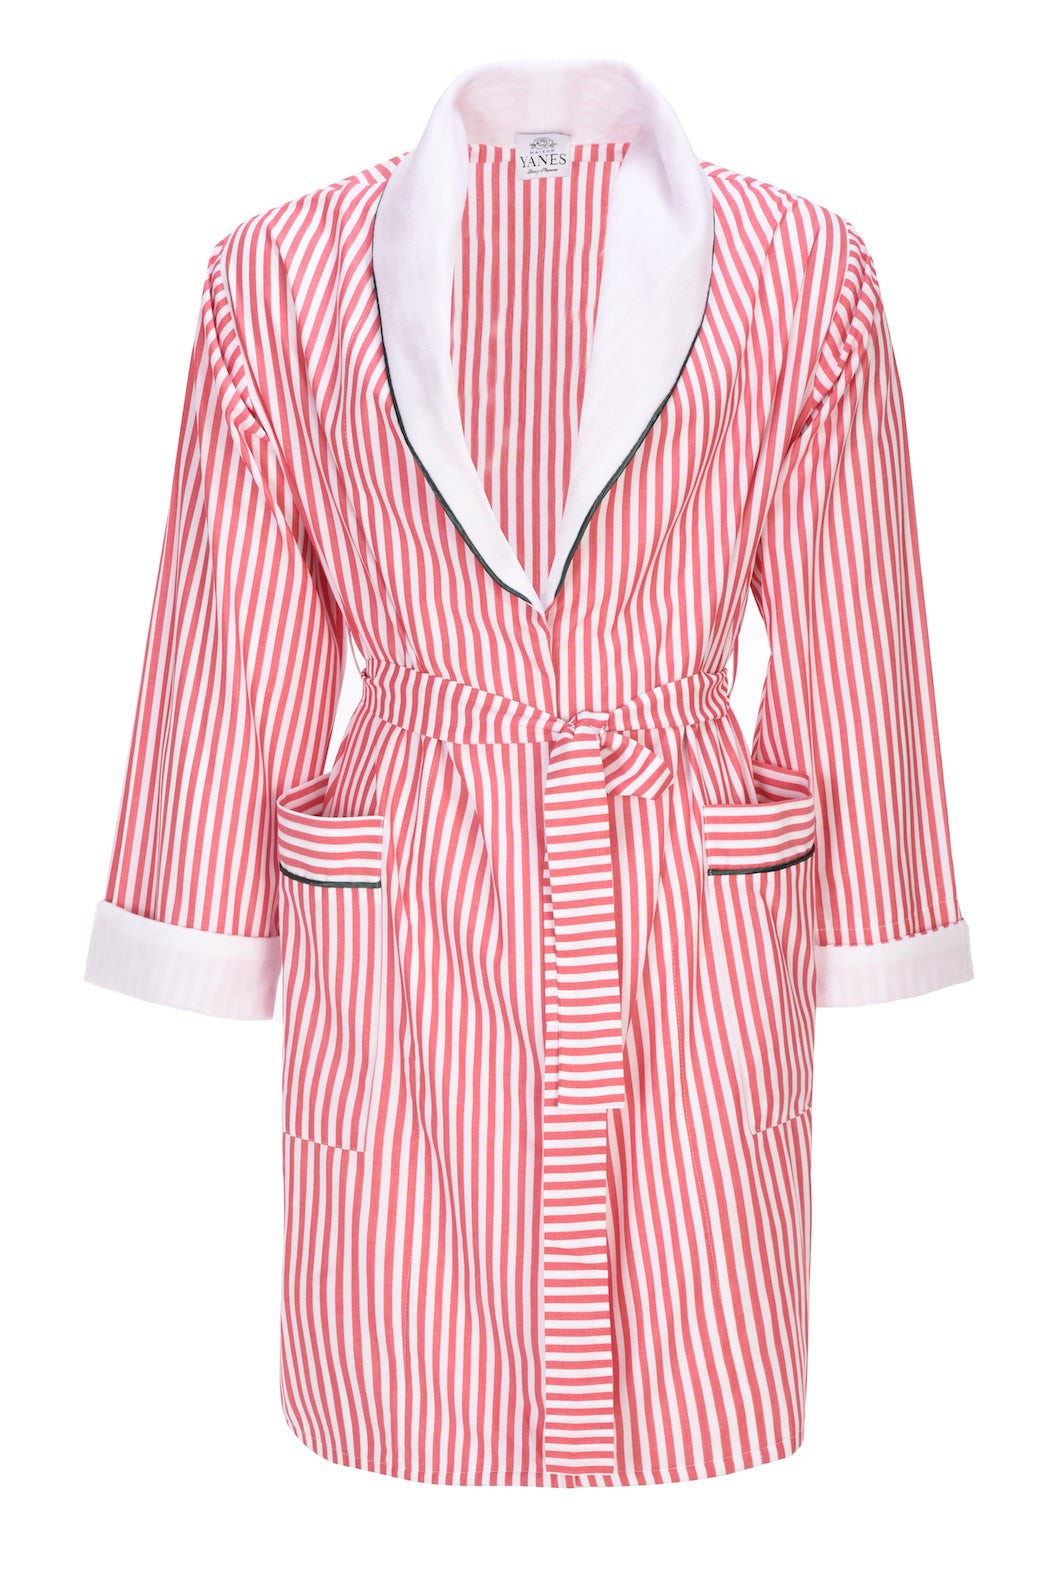 Red Striped Men's Dressing Gown